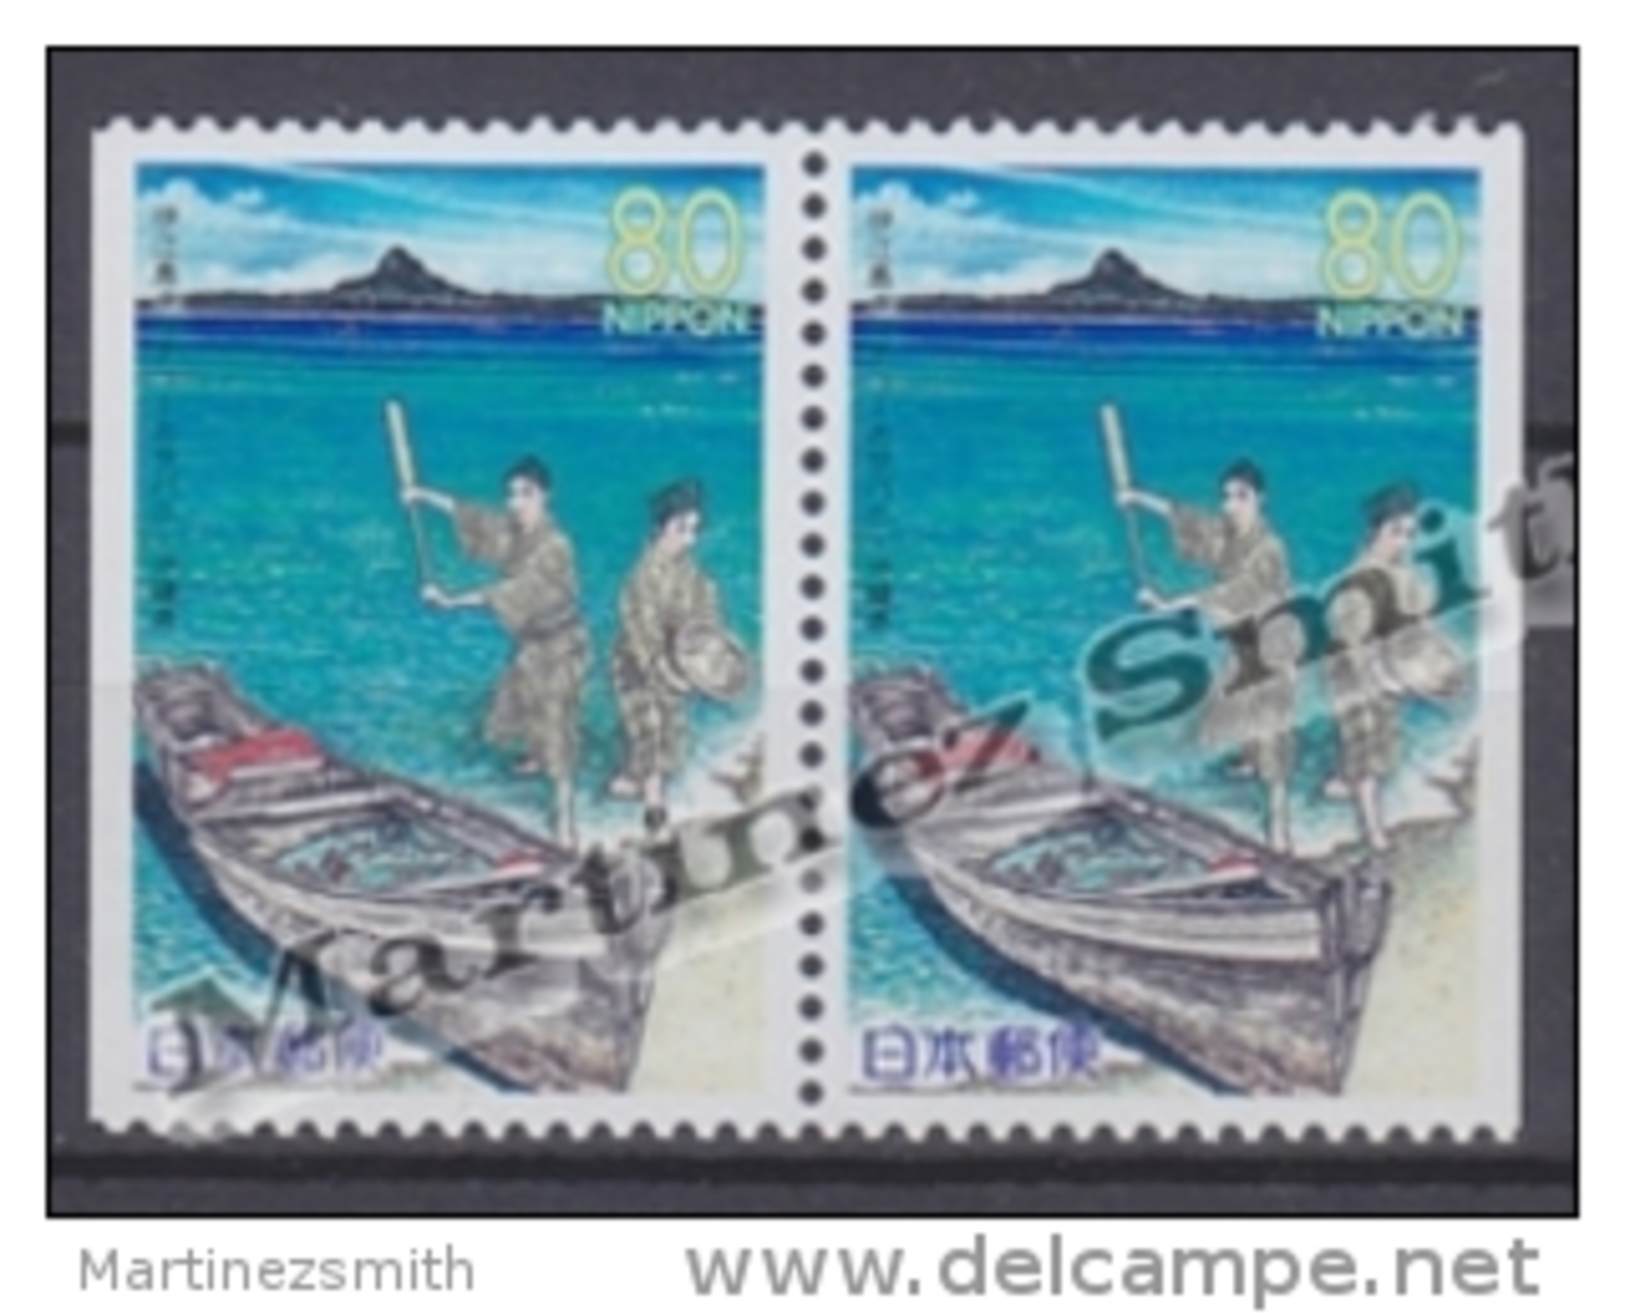 Japan - Japon 1999 Yvert 2615a, Fishing Boat, Okinawa - Pair From Booklet - MNH - Neufs